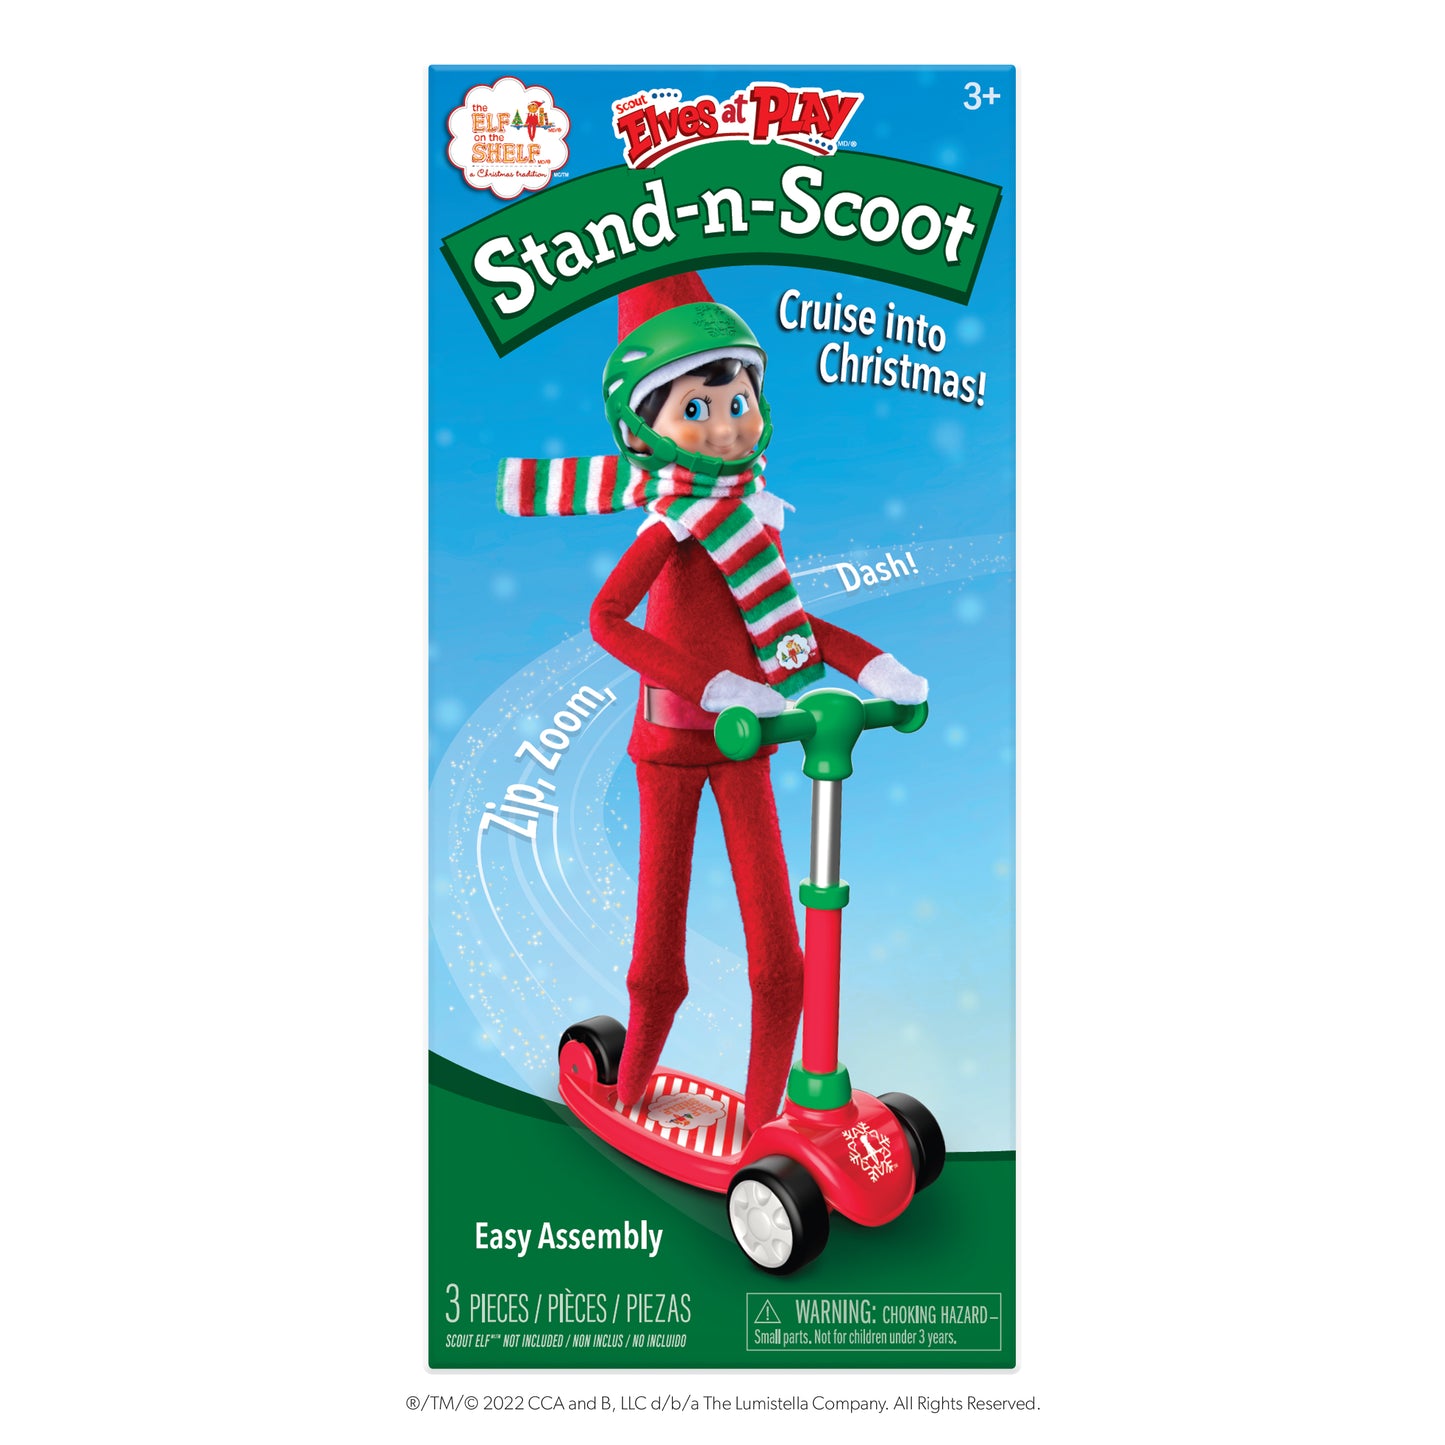 Scout Elves at Play® Stand-n-Scoot